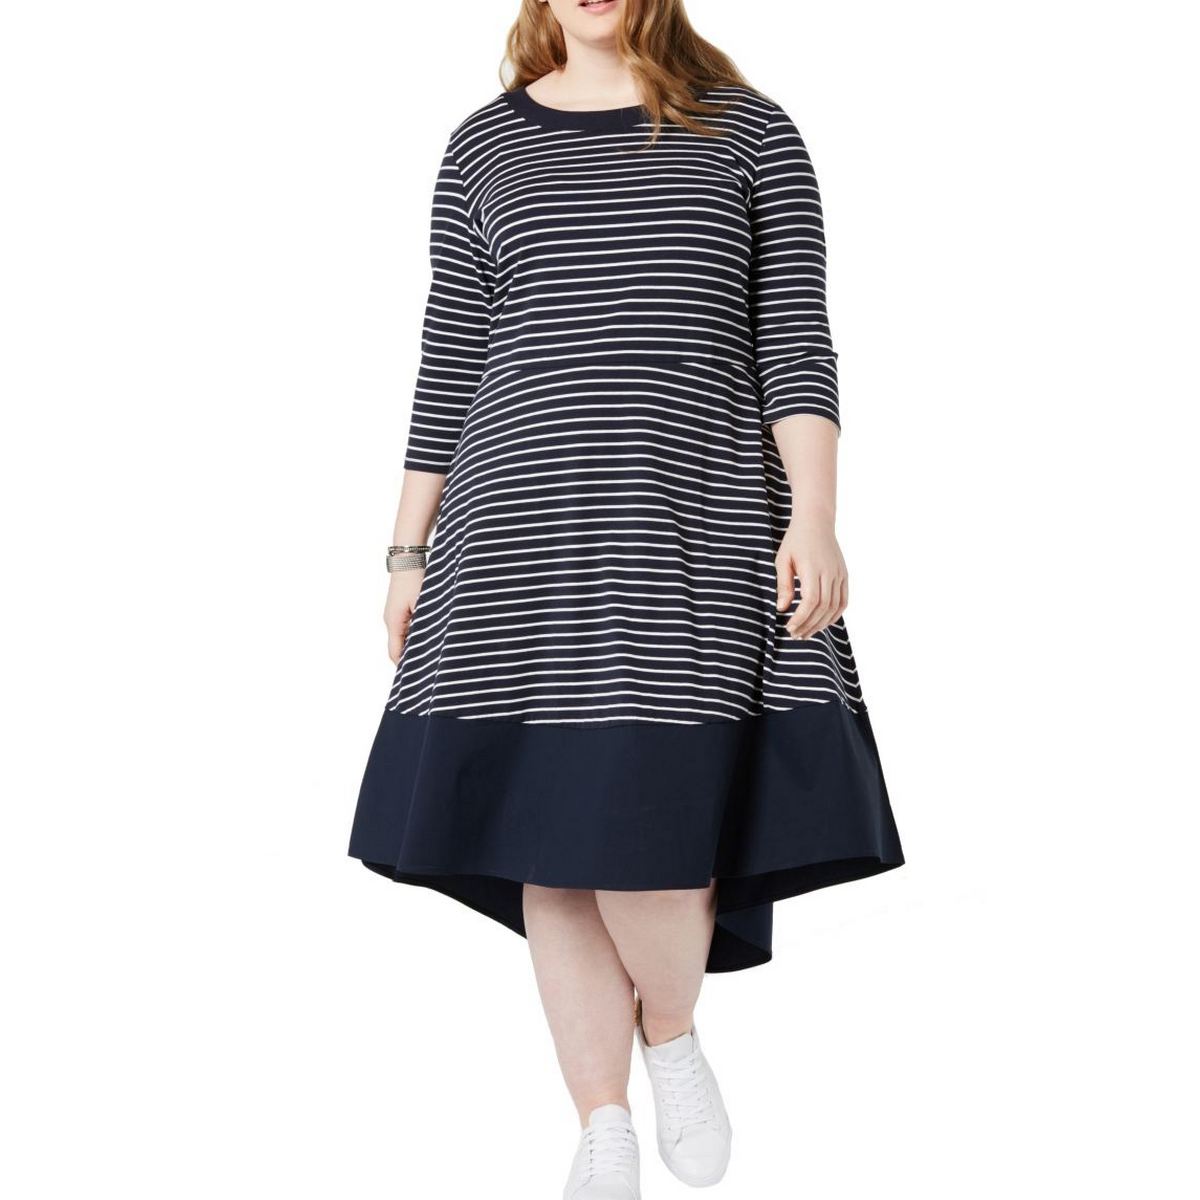 tommy hilfiger women's plus size clothing